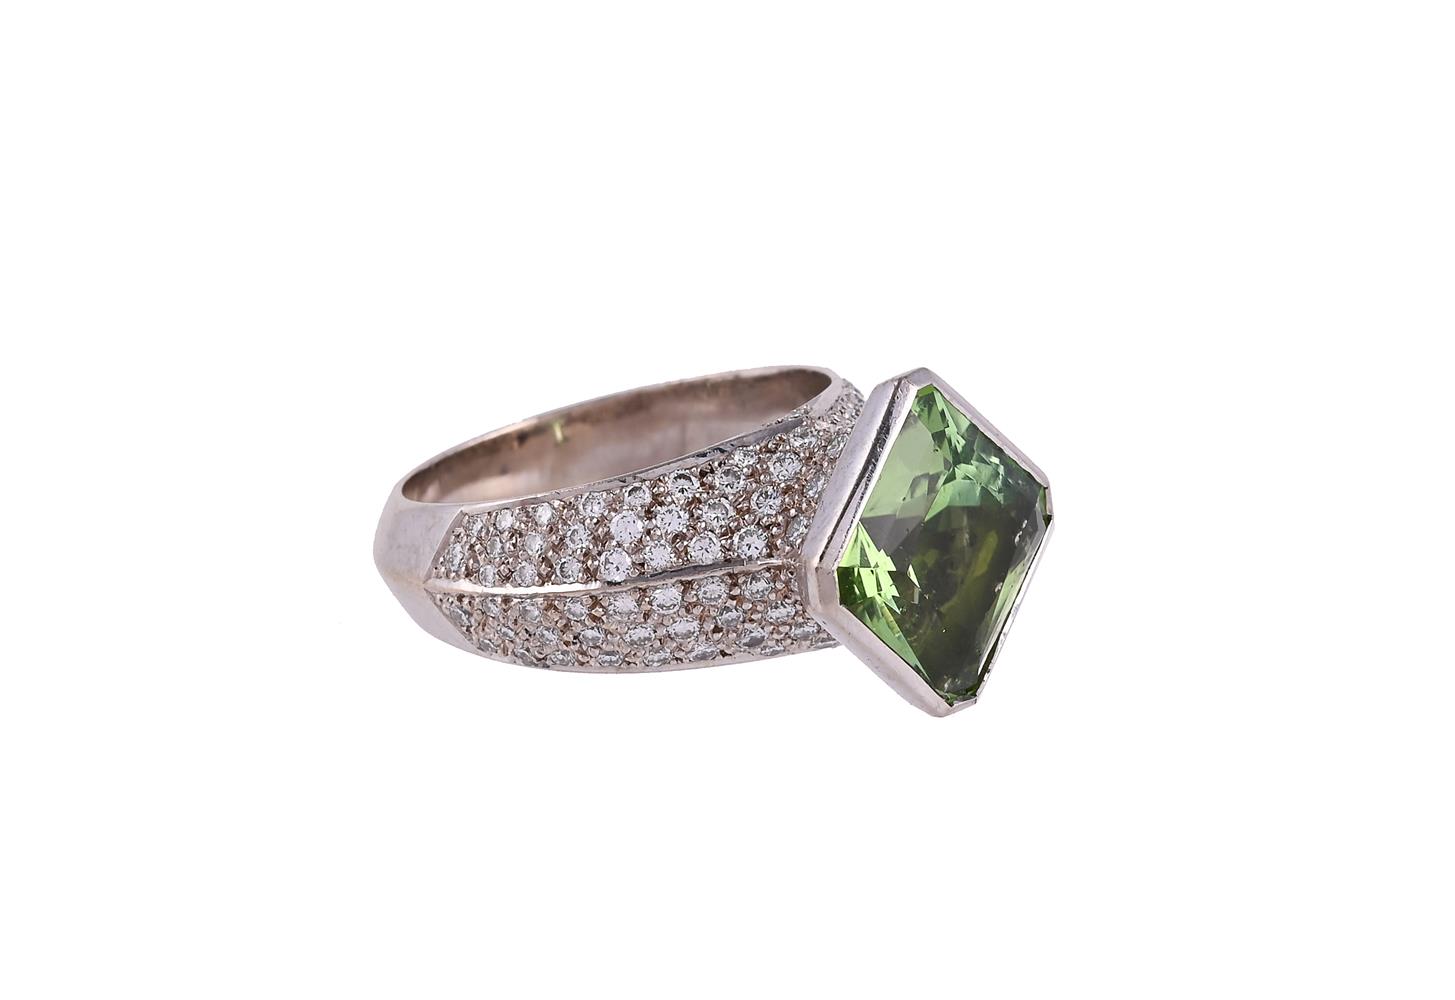 THEO FENNELL, A DIAMOND AND PERIDOT DRESS RING, LONDON 2003 - Image 2 of 2